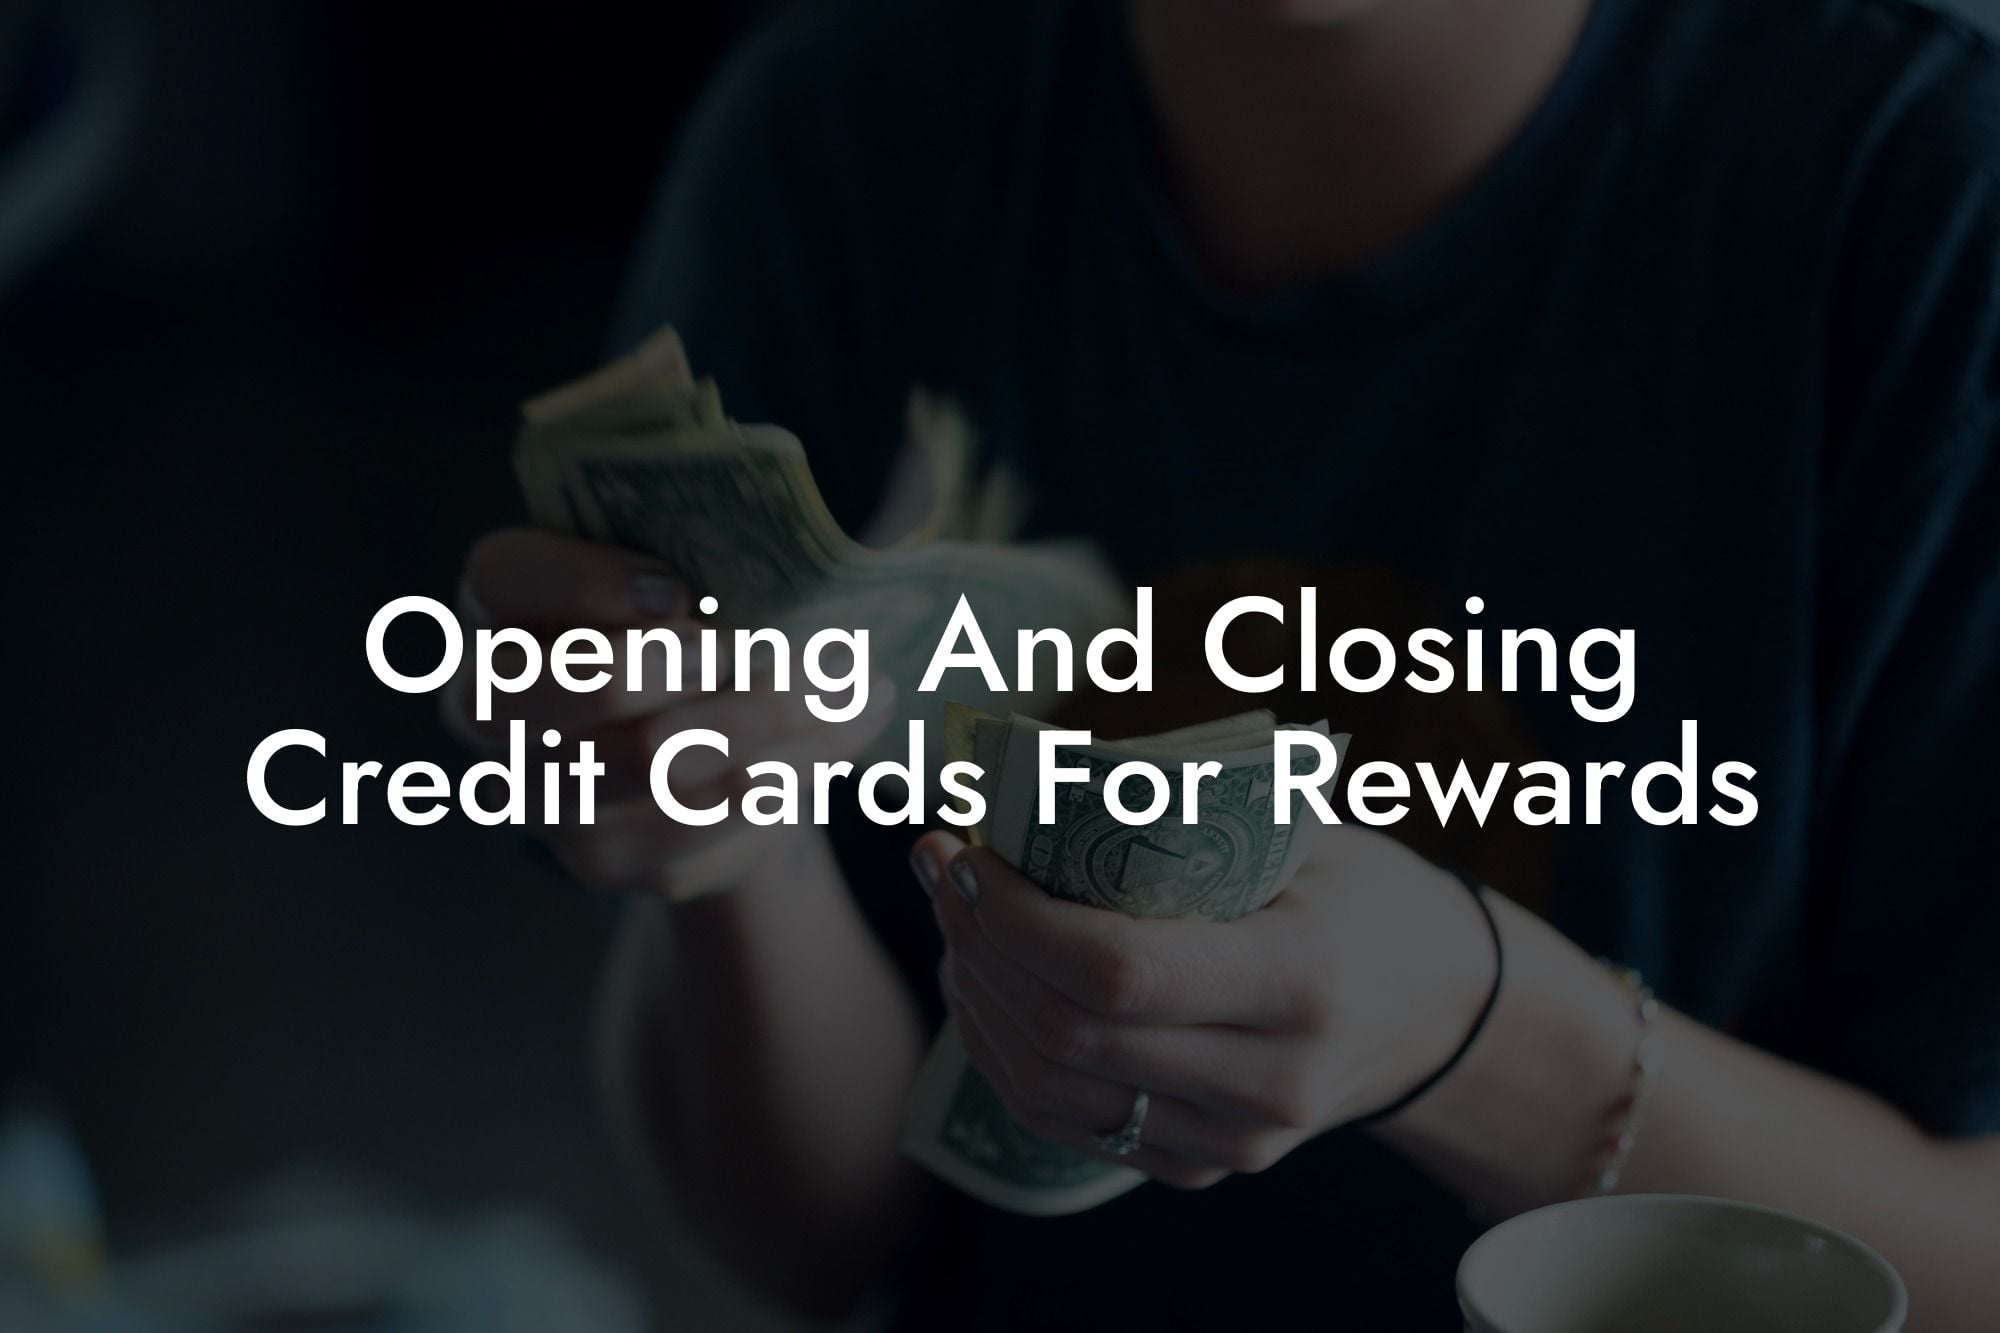 Opening And Closing Credit Cards For Rewards